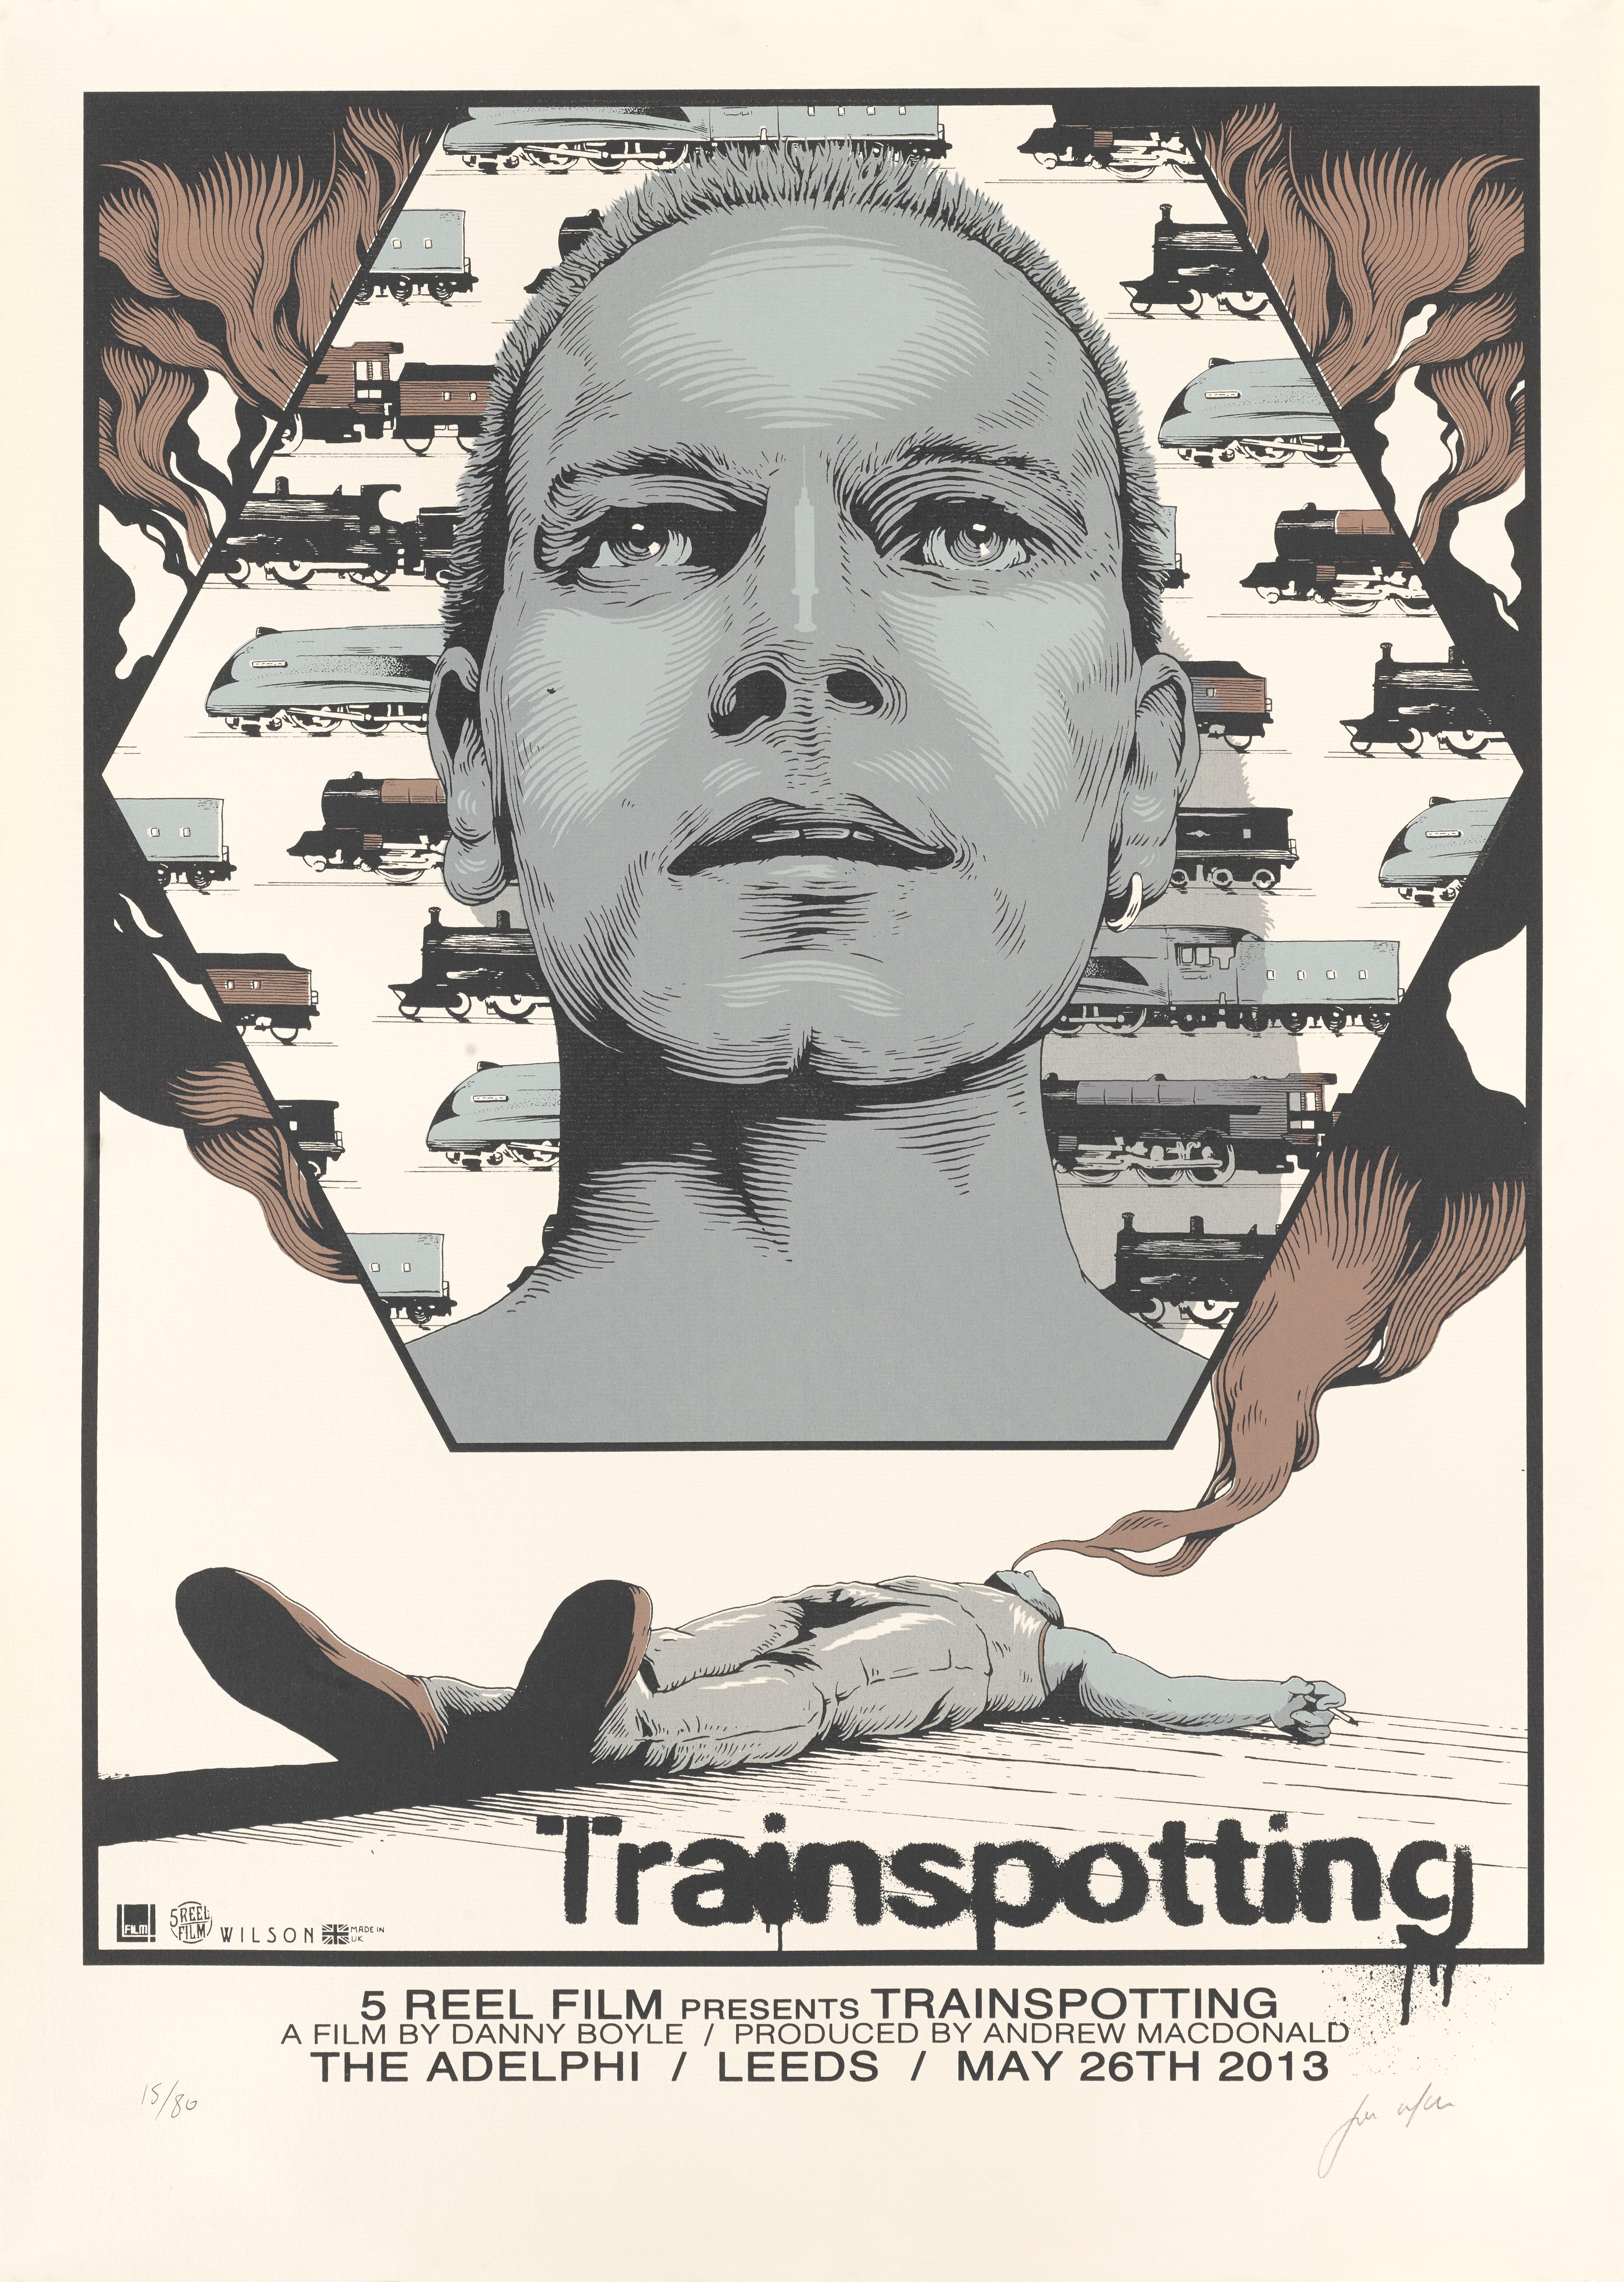 Trainspotting is a cult British drama from 1996 starring Ewan McGregor, Ewen Brenner and Jonny Lee Miller this four-color screen print limited is a Limited edition 15/80 for one showing on the 26th May 2013 at the Adelphi in Leeds, UK, The artwork